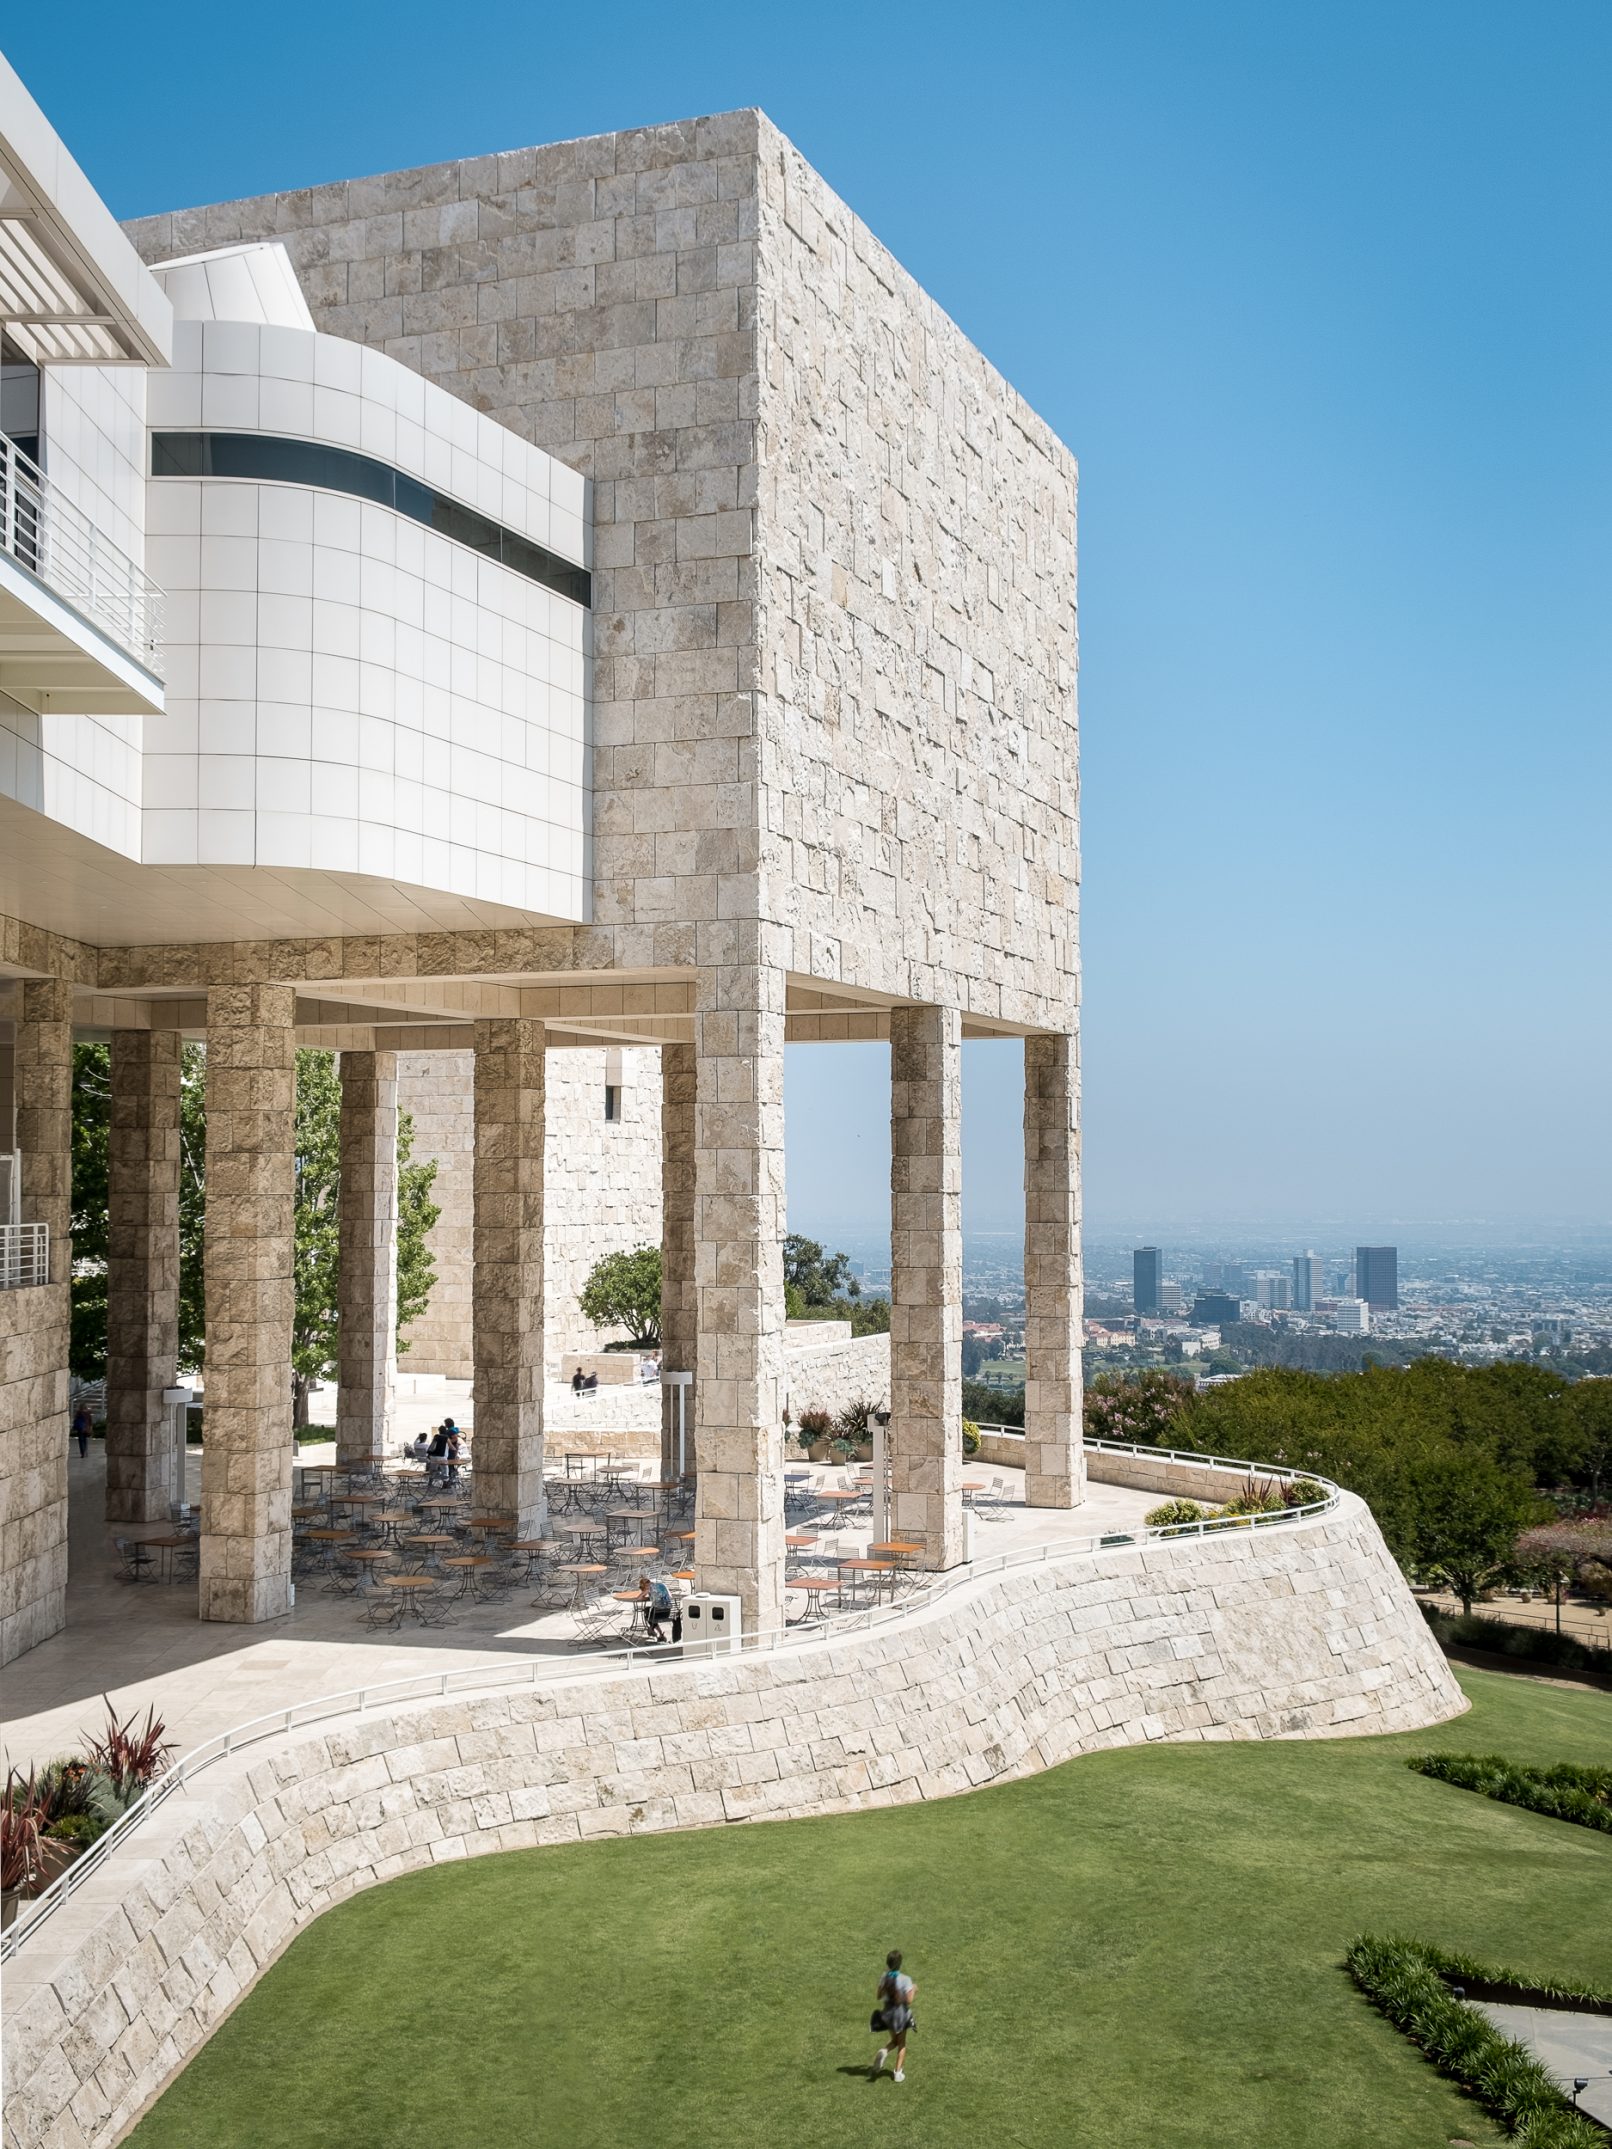 Architectural Photograph of the Getty Center in Los Angeles designed by Richard Meier and Partners featuring a shot of the marble exterior looking out towards Santa Monica